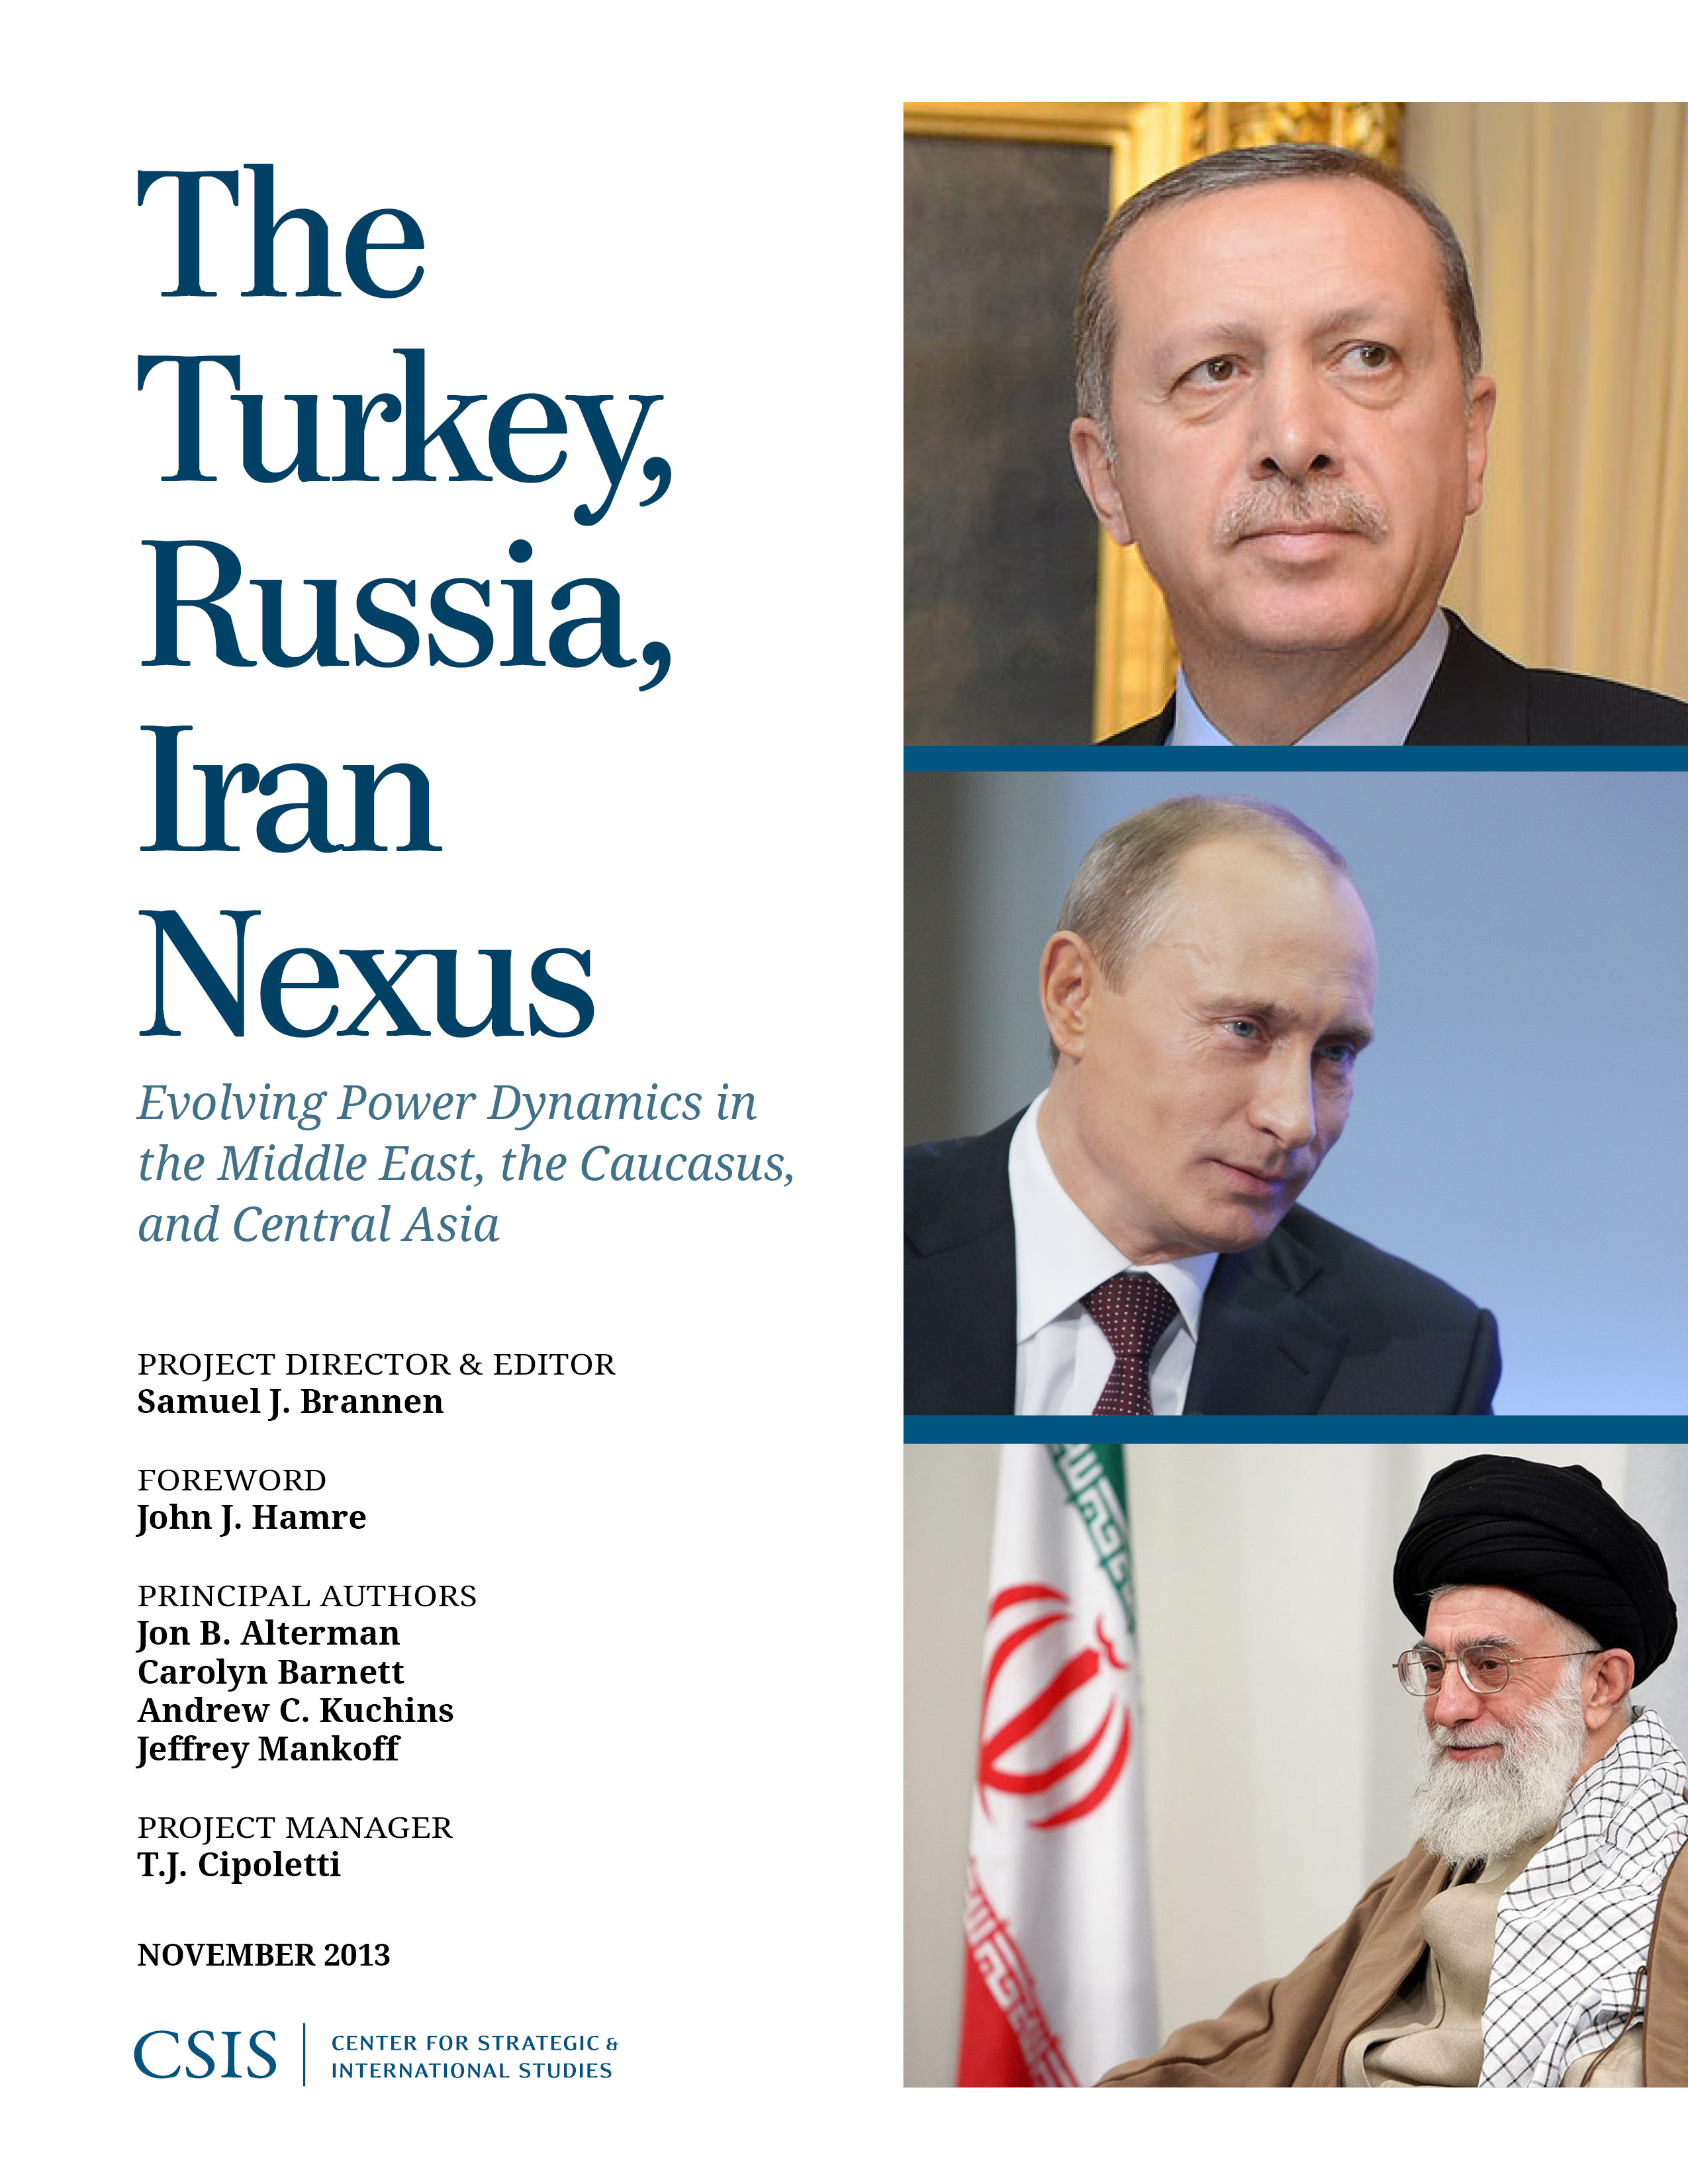 The Turkey, Russia, Iran Nexus: Evolving Power Dynamics in the Middle East, the Caucasus, and Central Asia